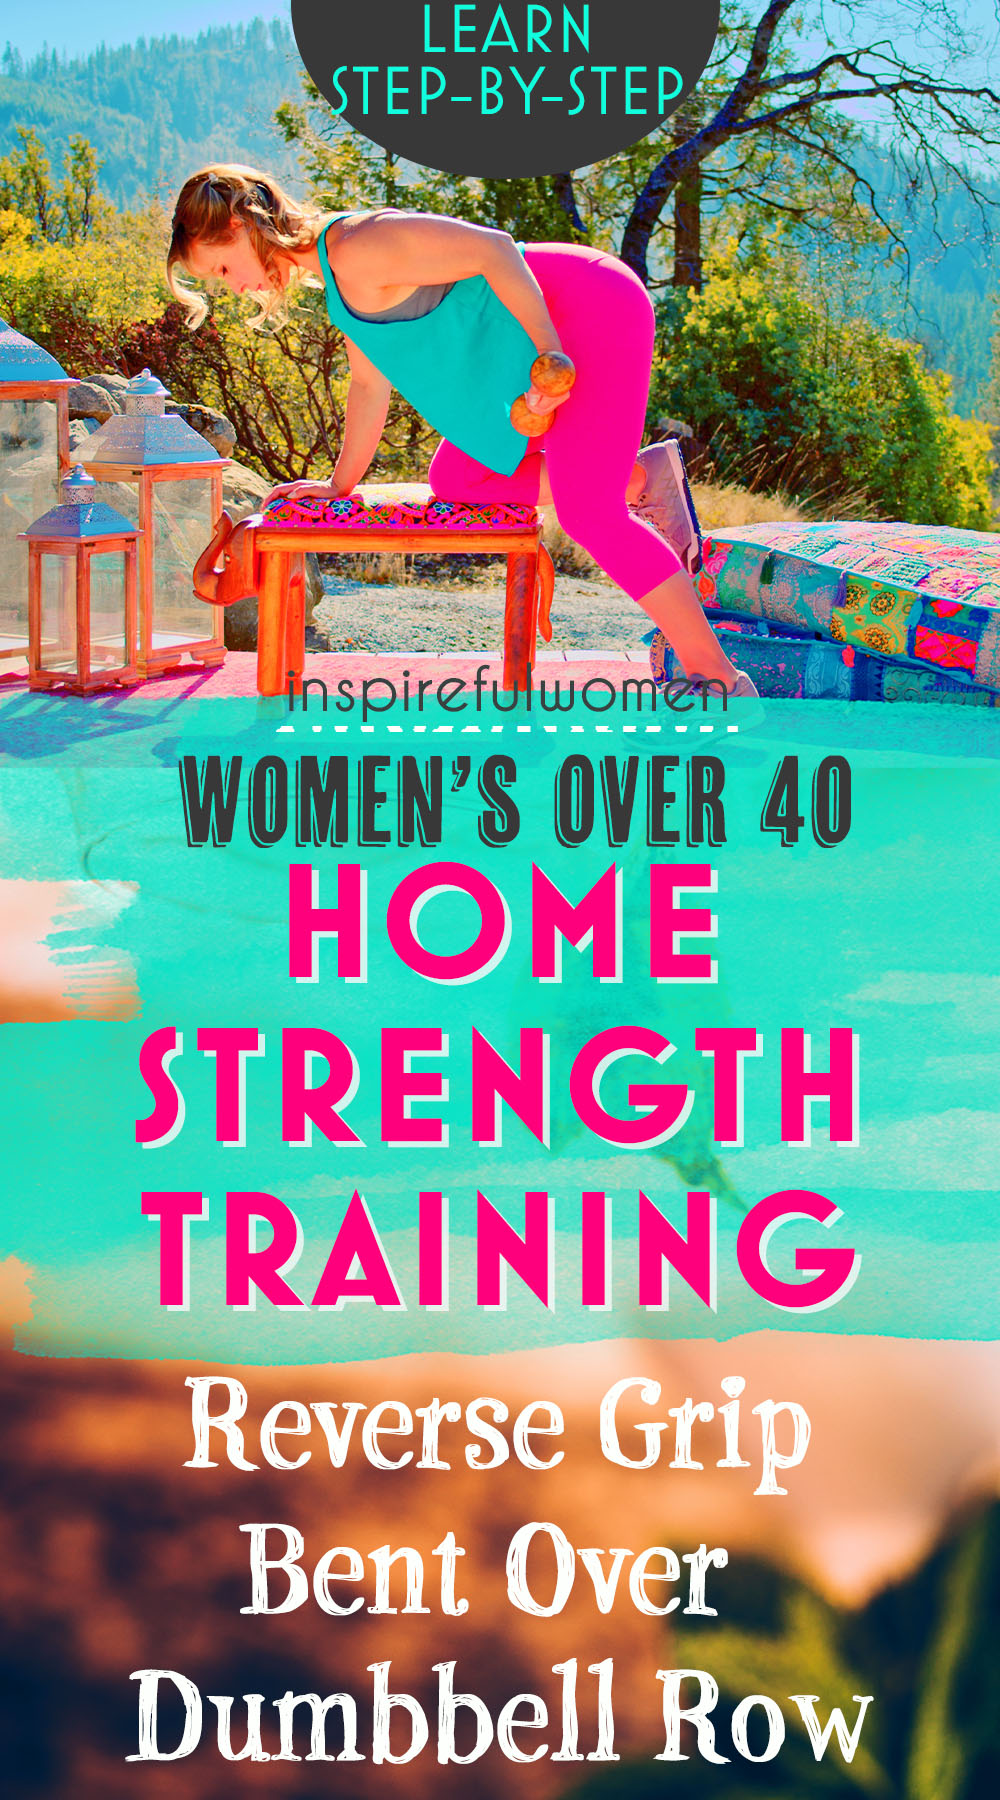 reverse-grip-bent-over-dumbbell-row-lats-strength-training-at-home-womens-over-40